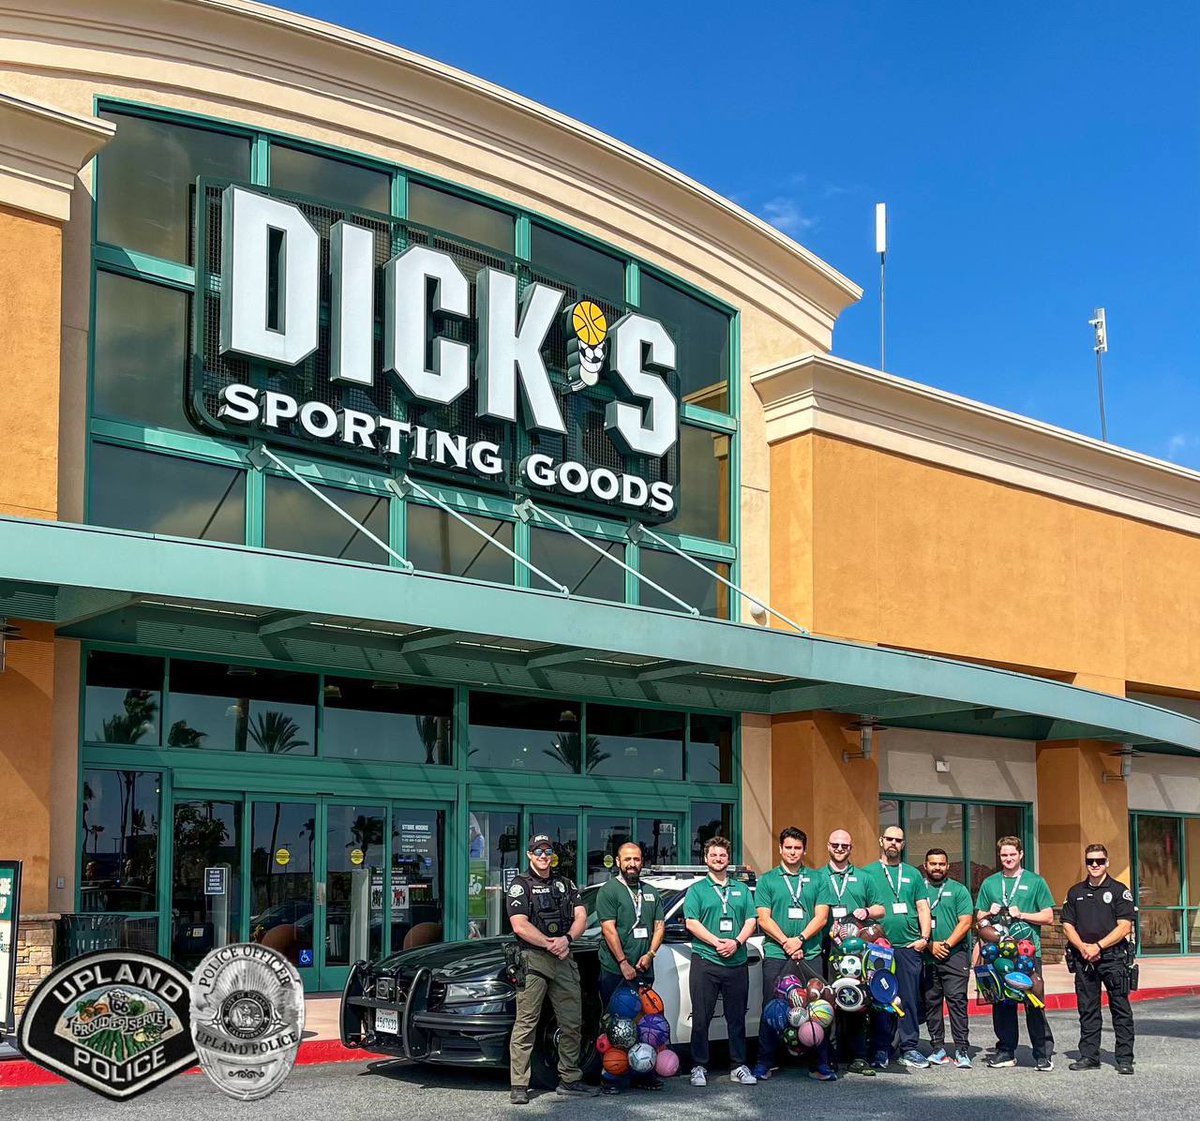 We would like to extend gratitude to DICK’S Sporting Goods for their generous donation of sports balls and frisbees. Their contribution will enhance our community outreach efforts and foster positive interactions between the department and the residents of Upland.